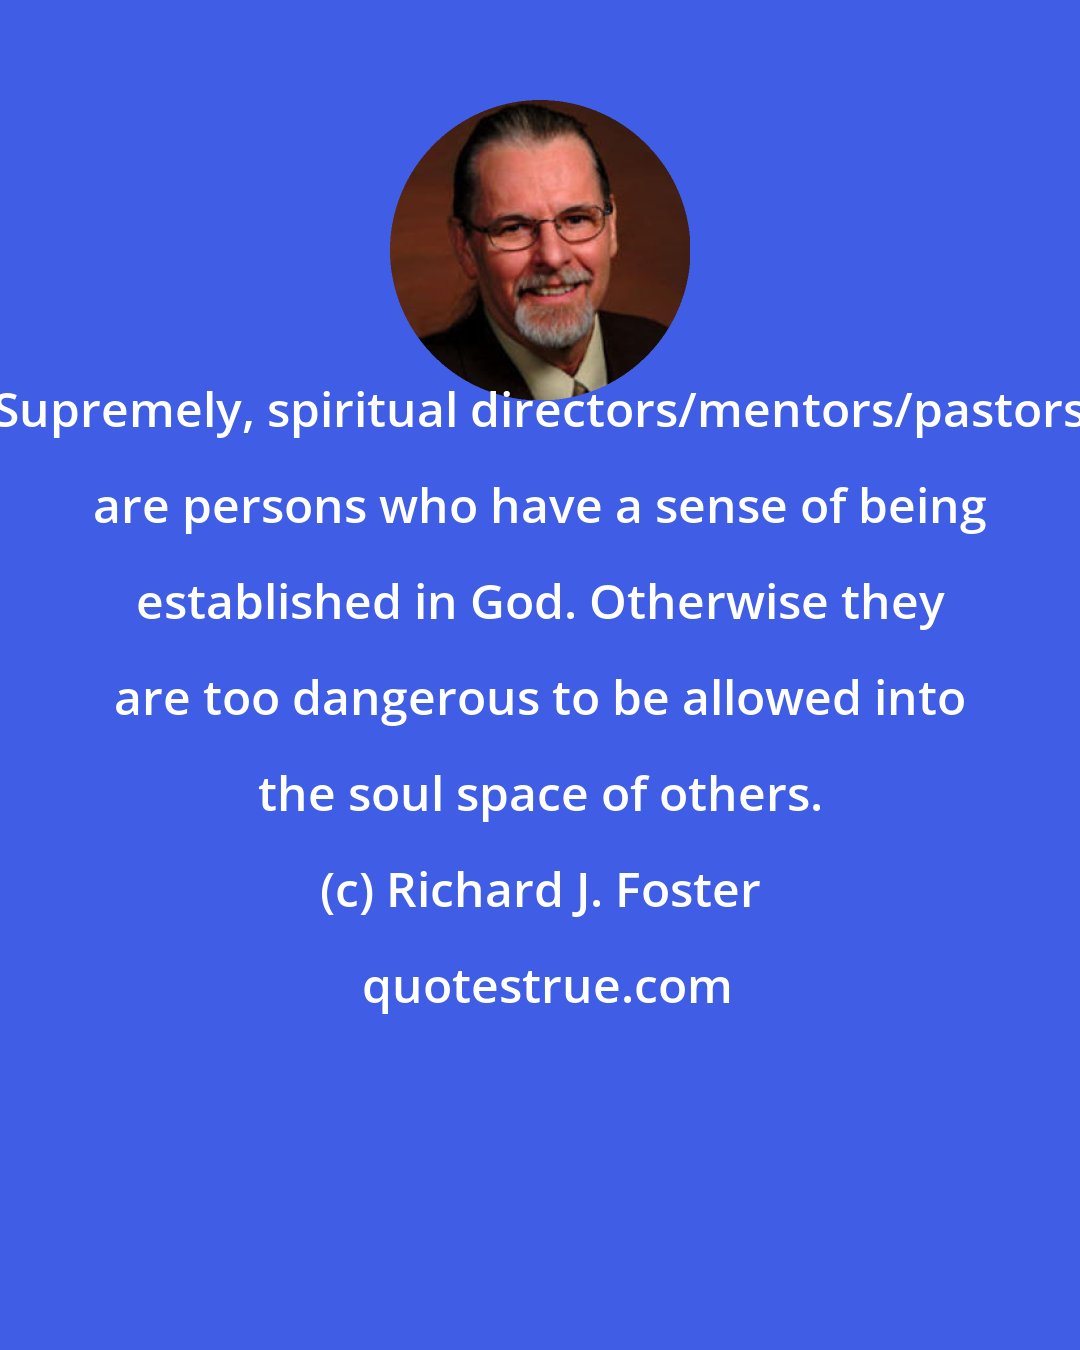 Richard J. Foster: Supremely, spiritual directors/mentors/pastors are persons who have a sense of being established in God. Otherwise they are too dangerous to be allowed into the soul space of others.